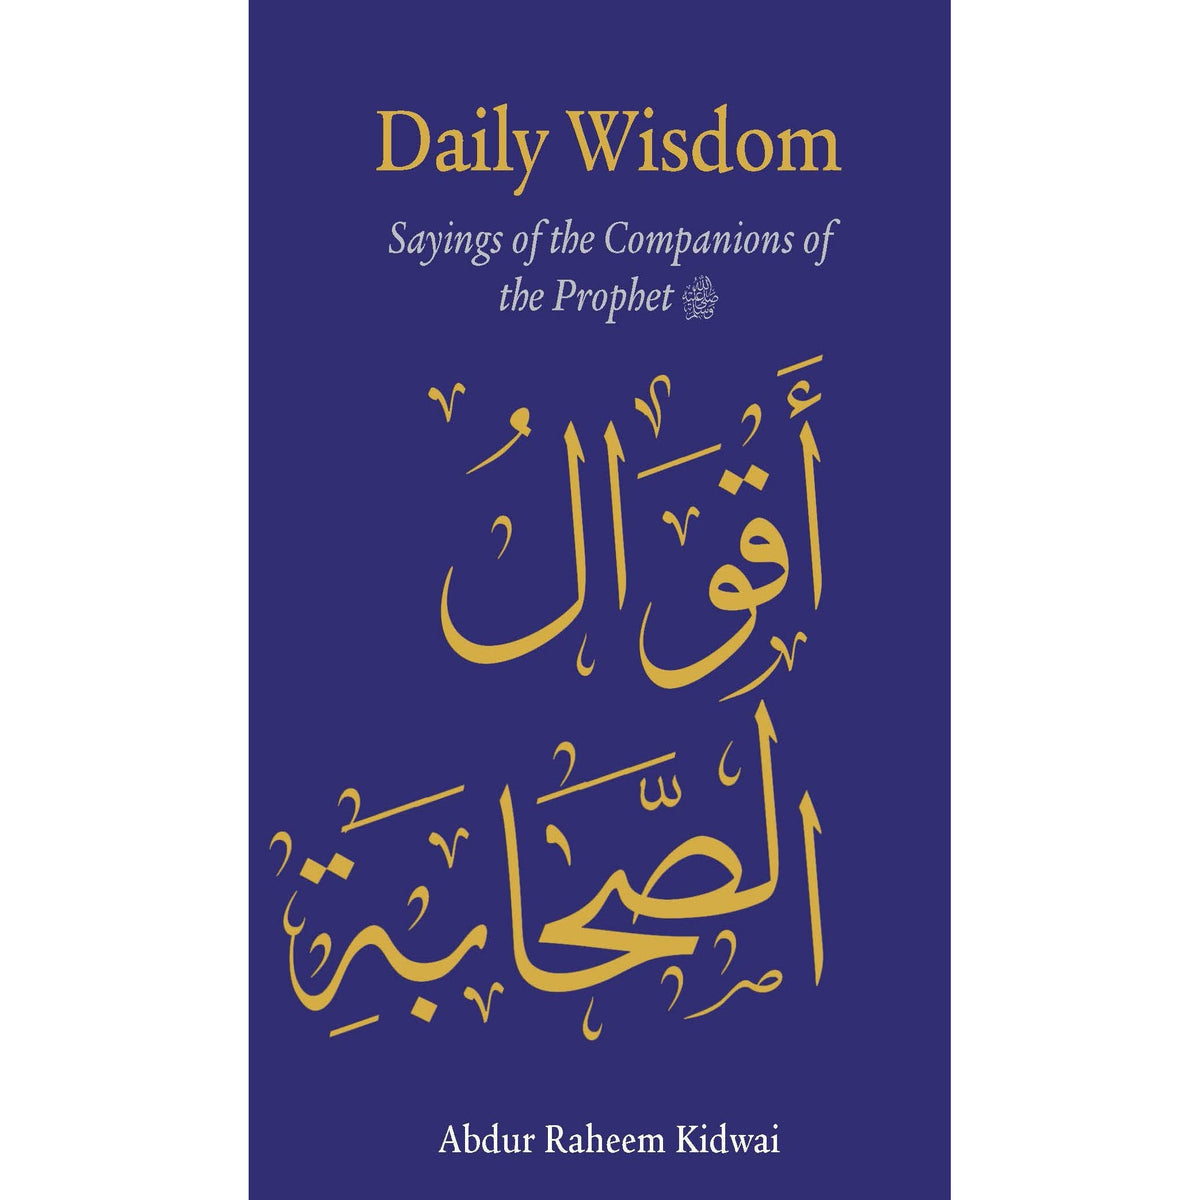 Daily Wisdom Collection Set of 4